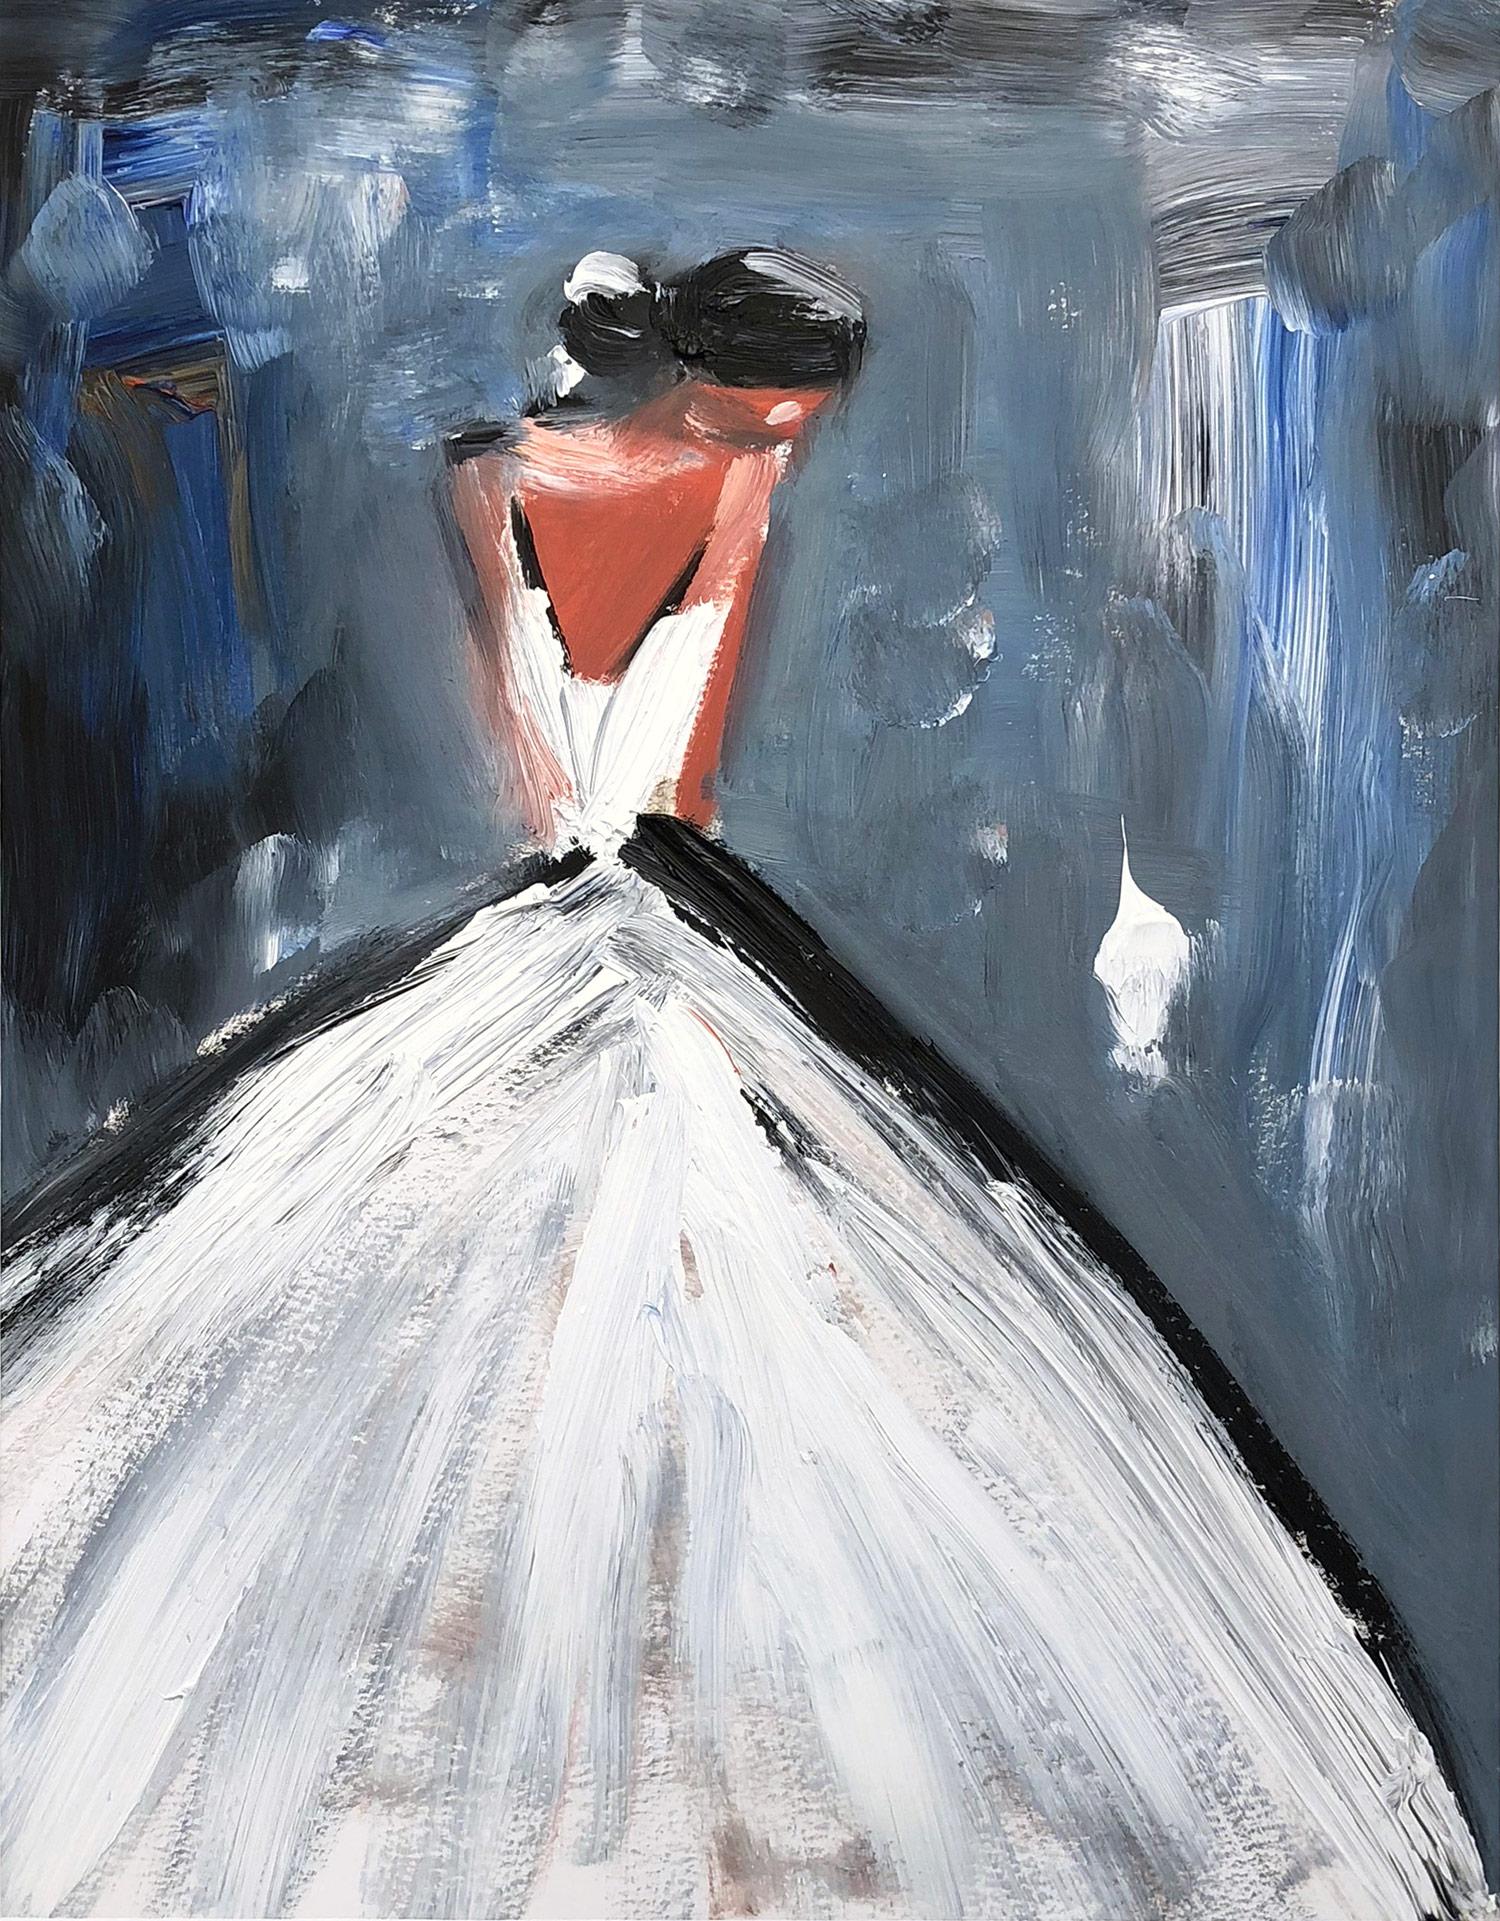 Cindy Shaoul Figurative Painting - "Olivia in Paris" Abstract Figure in Chanel Gown Haute Couture Painting on Paper